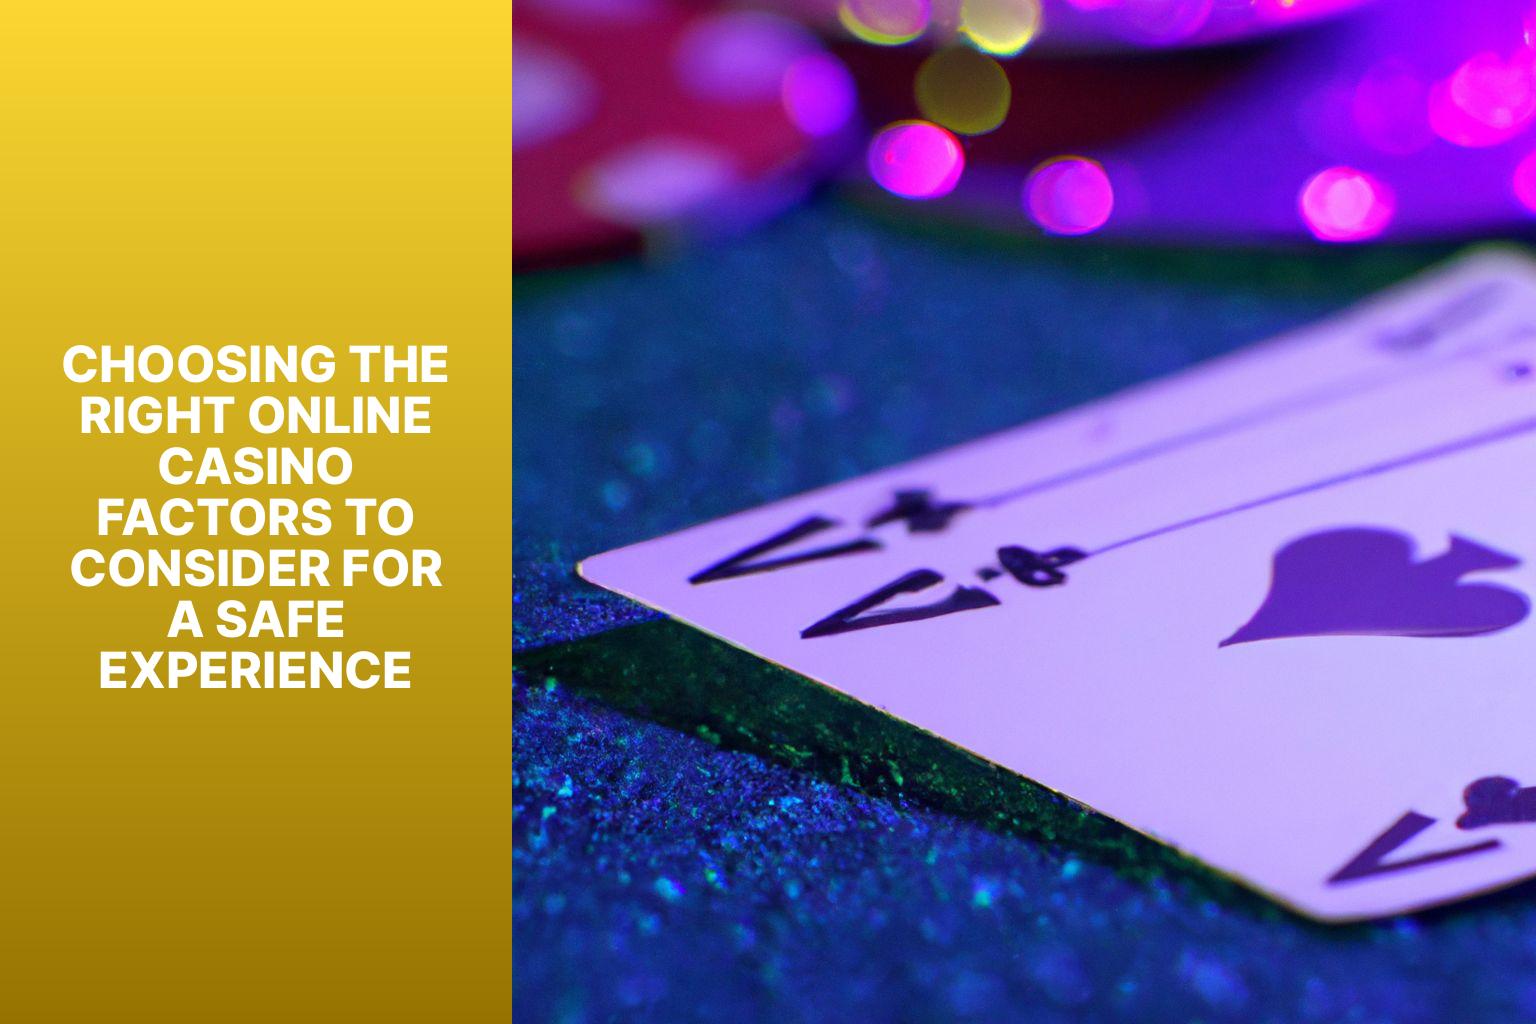 Choosing the Right Online Casino Factors to Consider for a Safe Experience